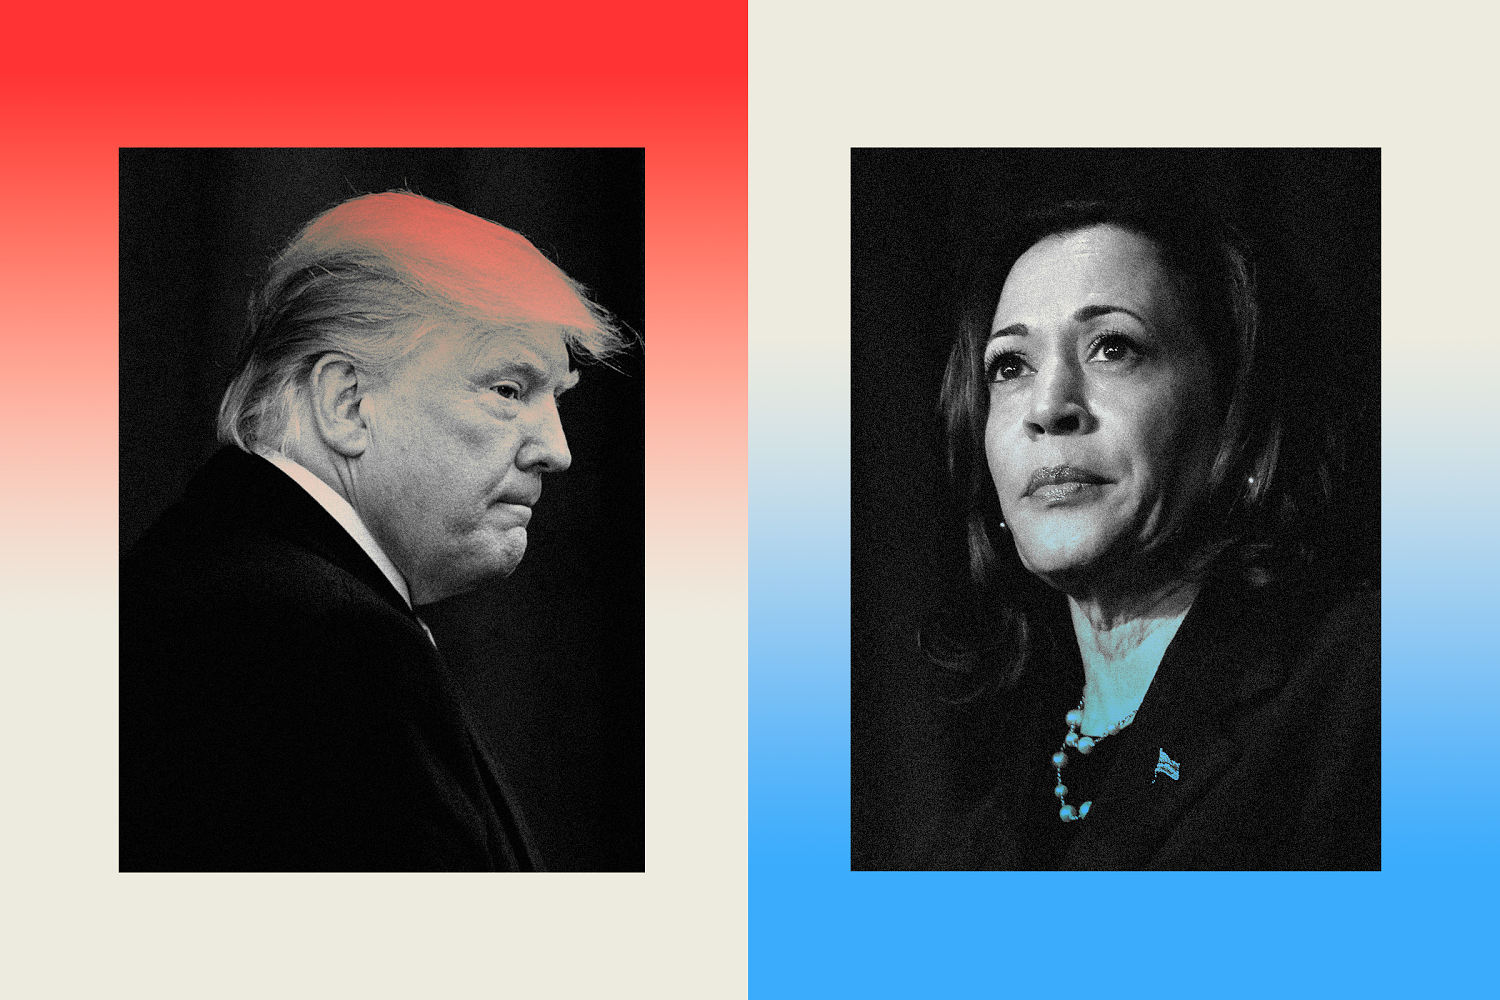 Harris and Trump: Compare where they stand on key issues